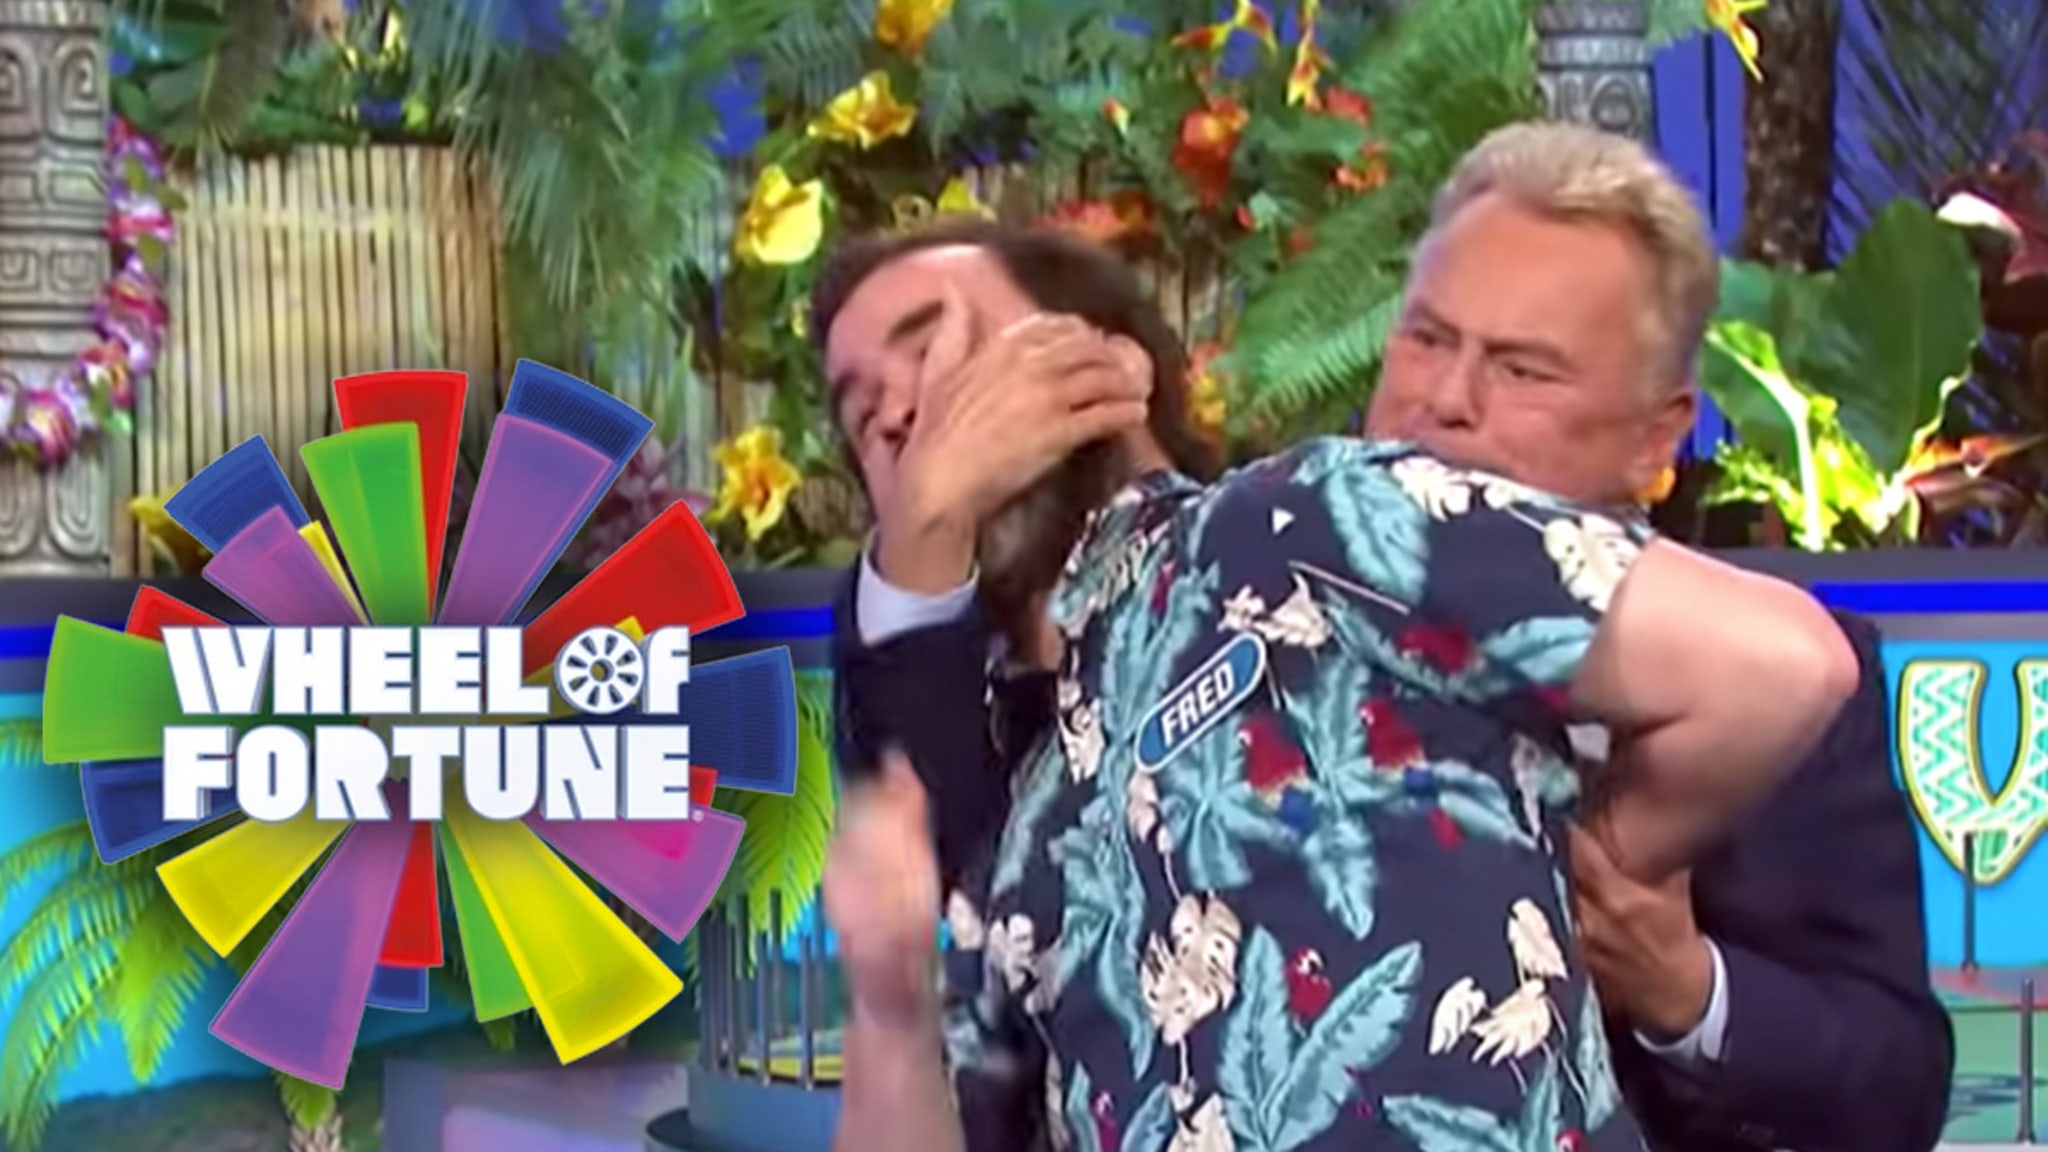 ‘Wheel of Fortune’ wrestler defends Pat Sajak after he was hated for Headlock